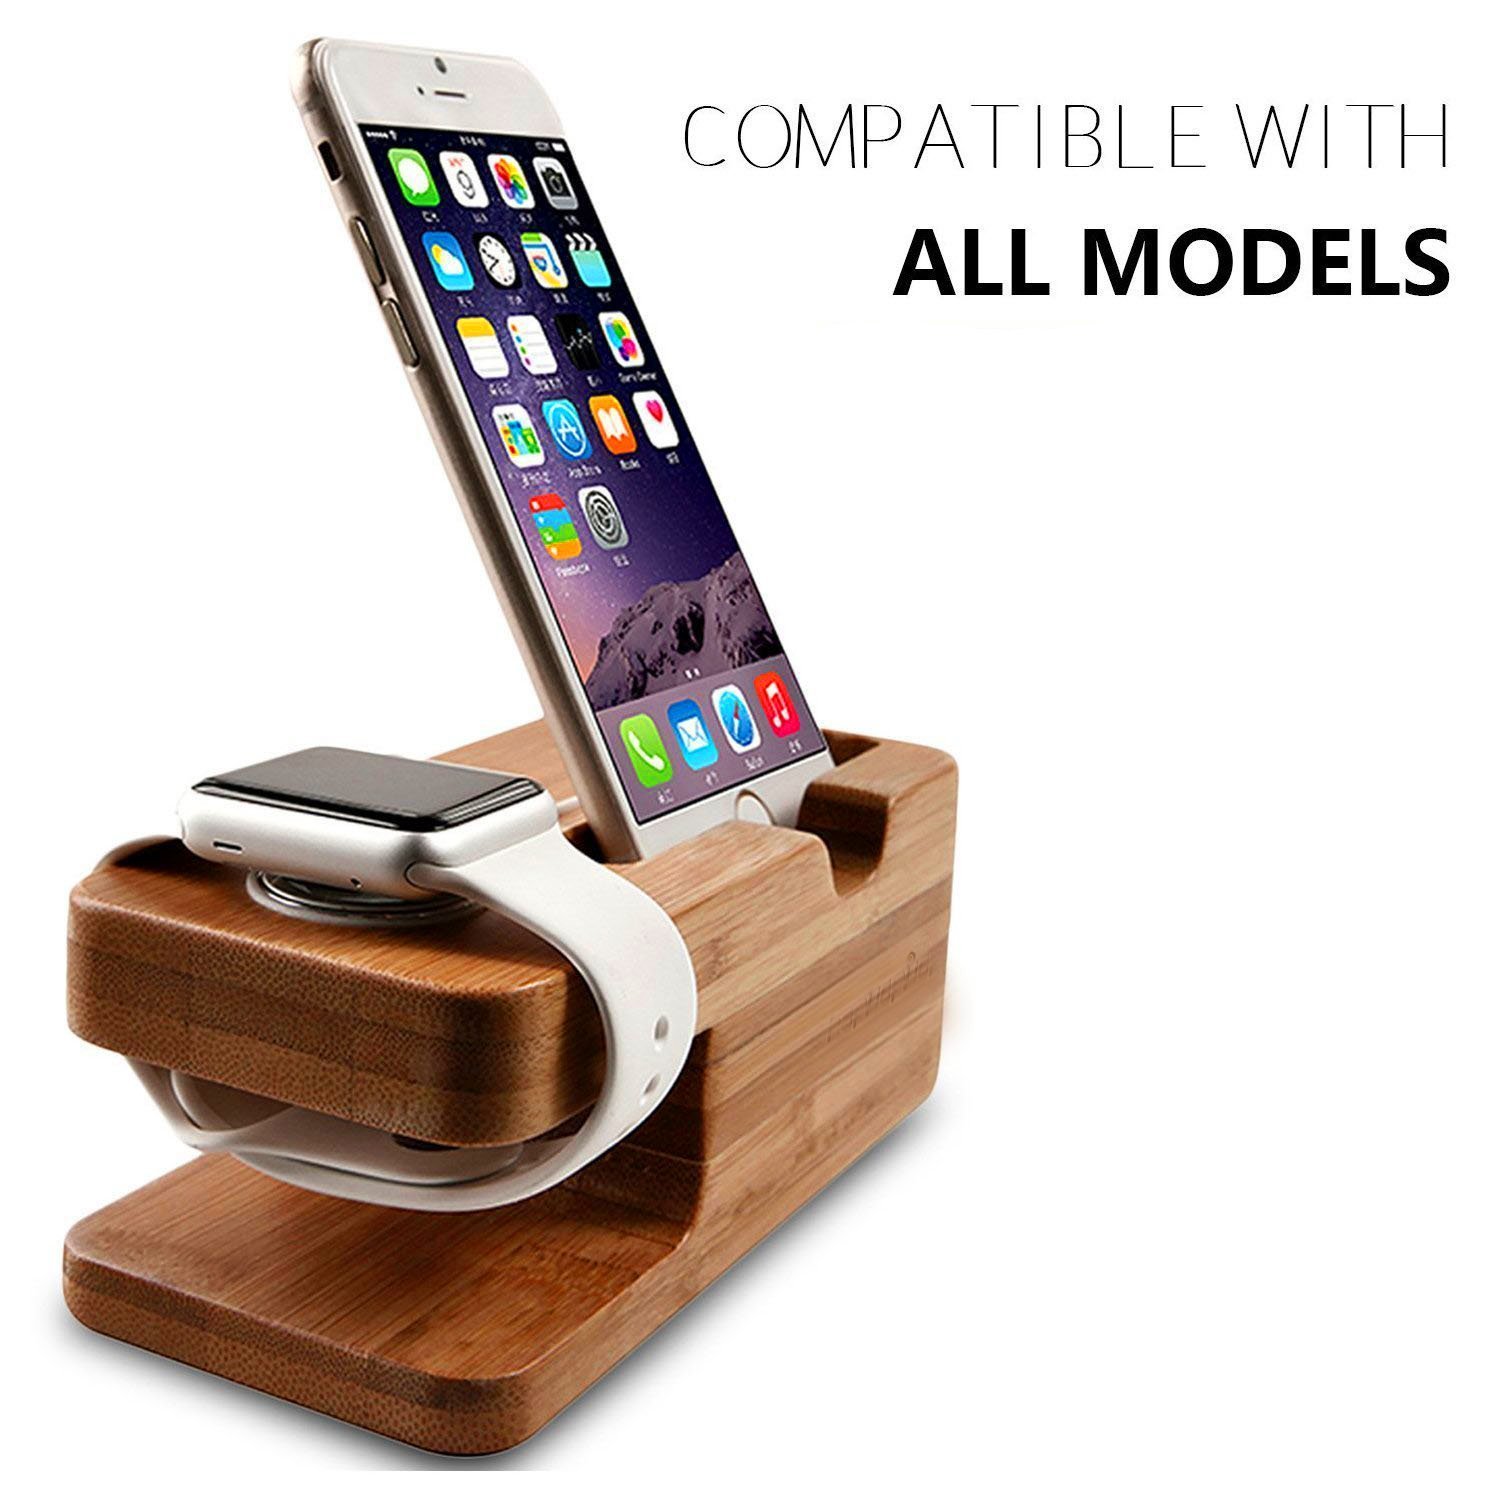 Watch Stand,AICase Bamboo Wood Charge Dock,Charge Dock Holder,Bamboo Wood Charge Station/Cradle for Apple Watch,iPhone,smartphone,iPhone iPad and Smartphones and Tablets (Bamboo Wood) - image 2 of 6